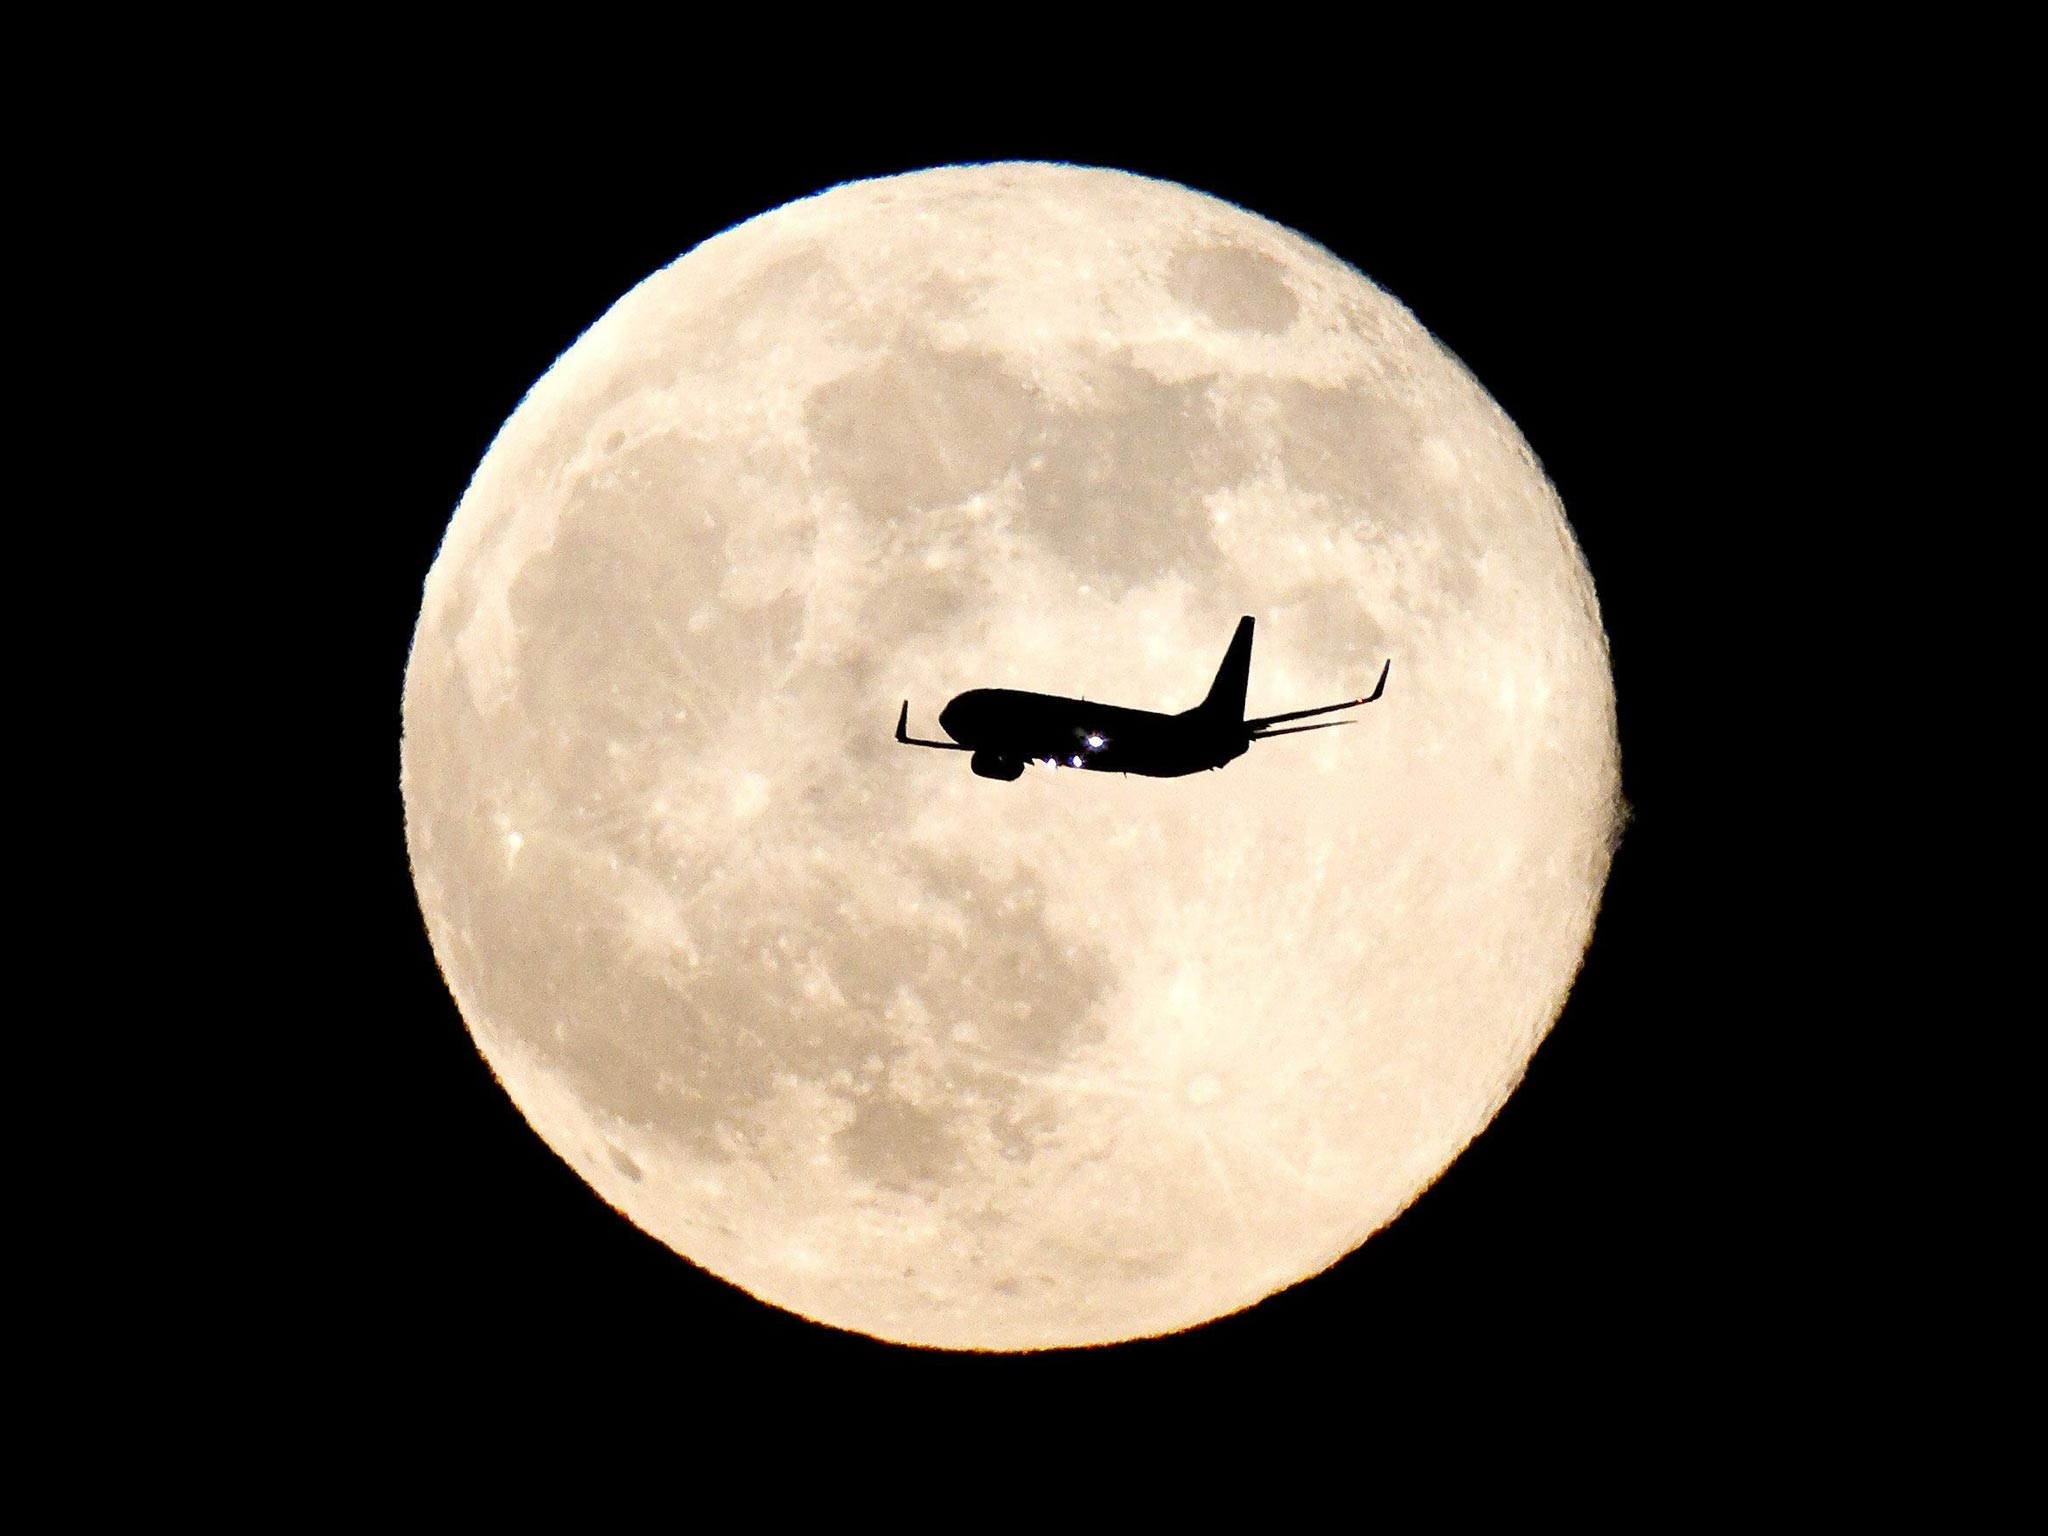 In airplane flies past the supermoon near Madrid, Spain.